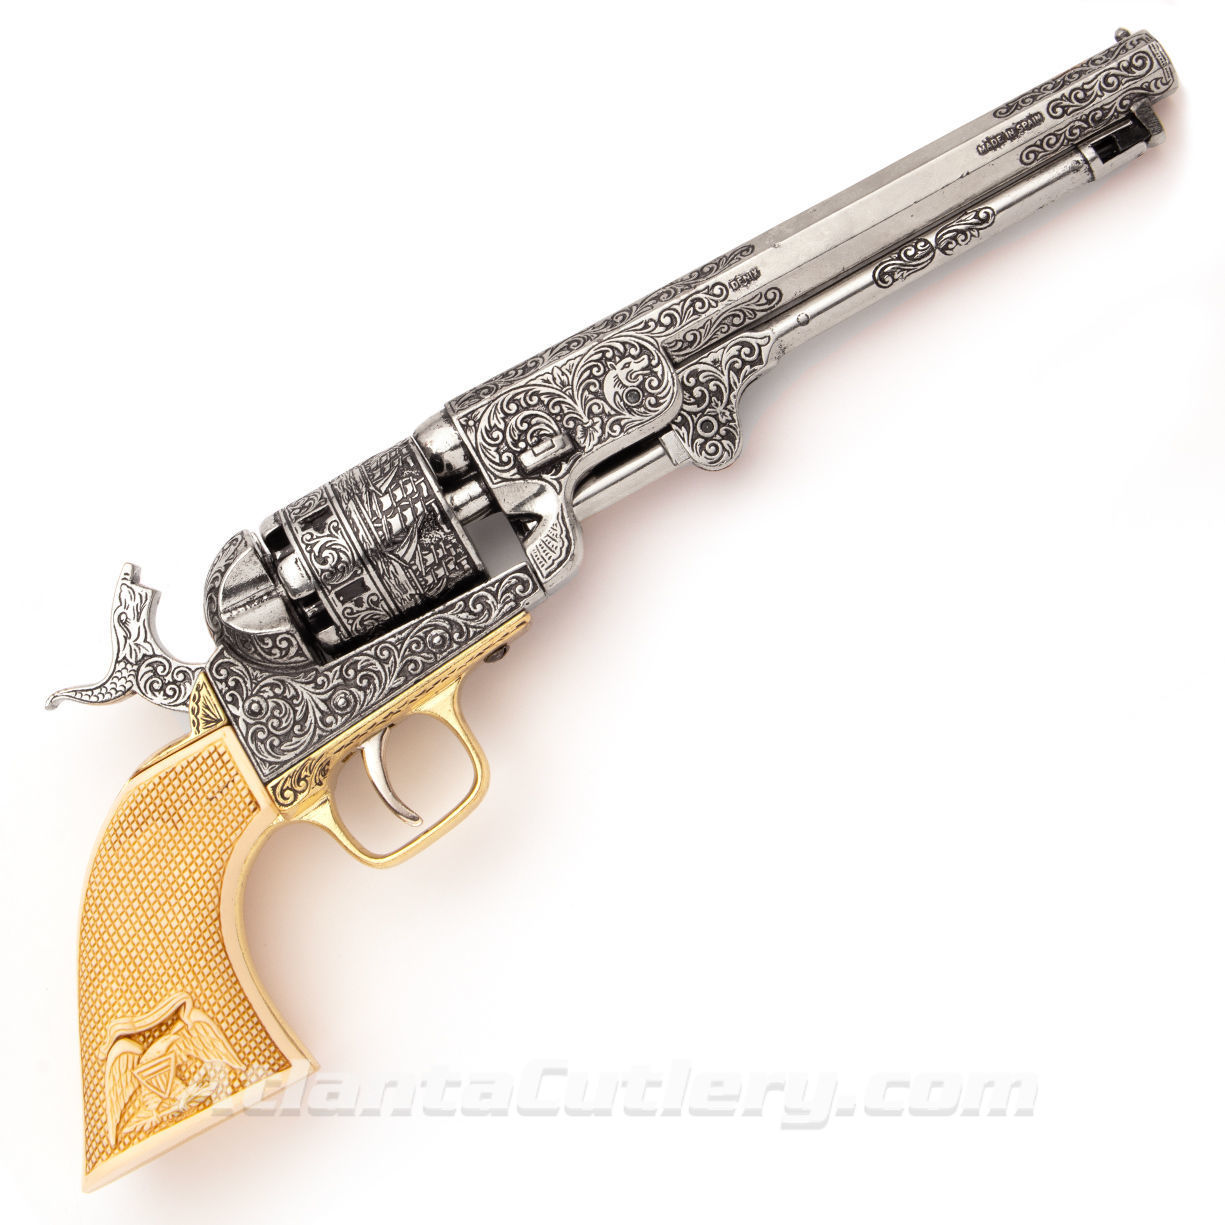 non-firing replica 1851 Civil War Revolver has working loading lever, faux ivory grips, engraving on frame and barrel 